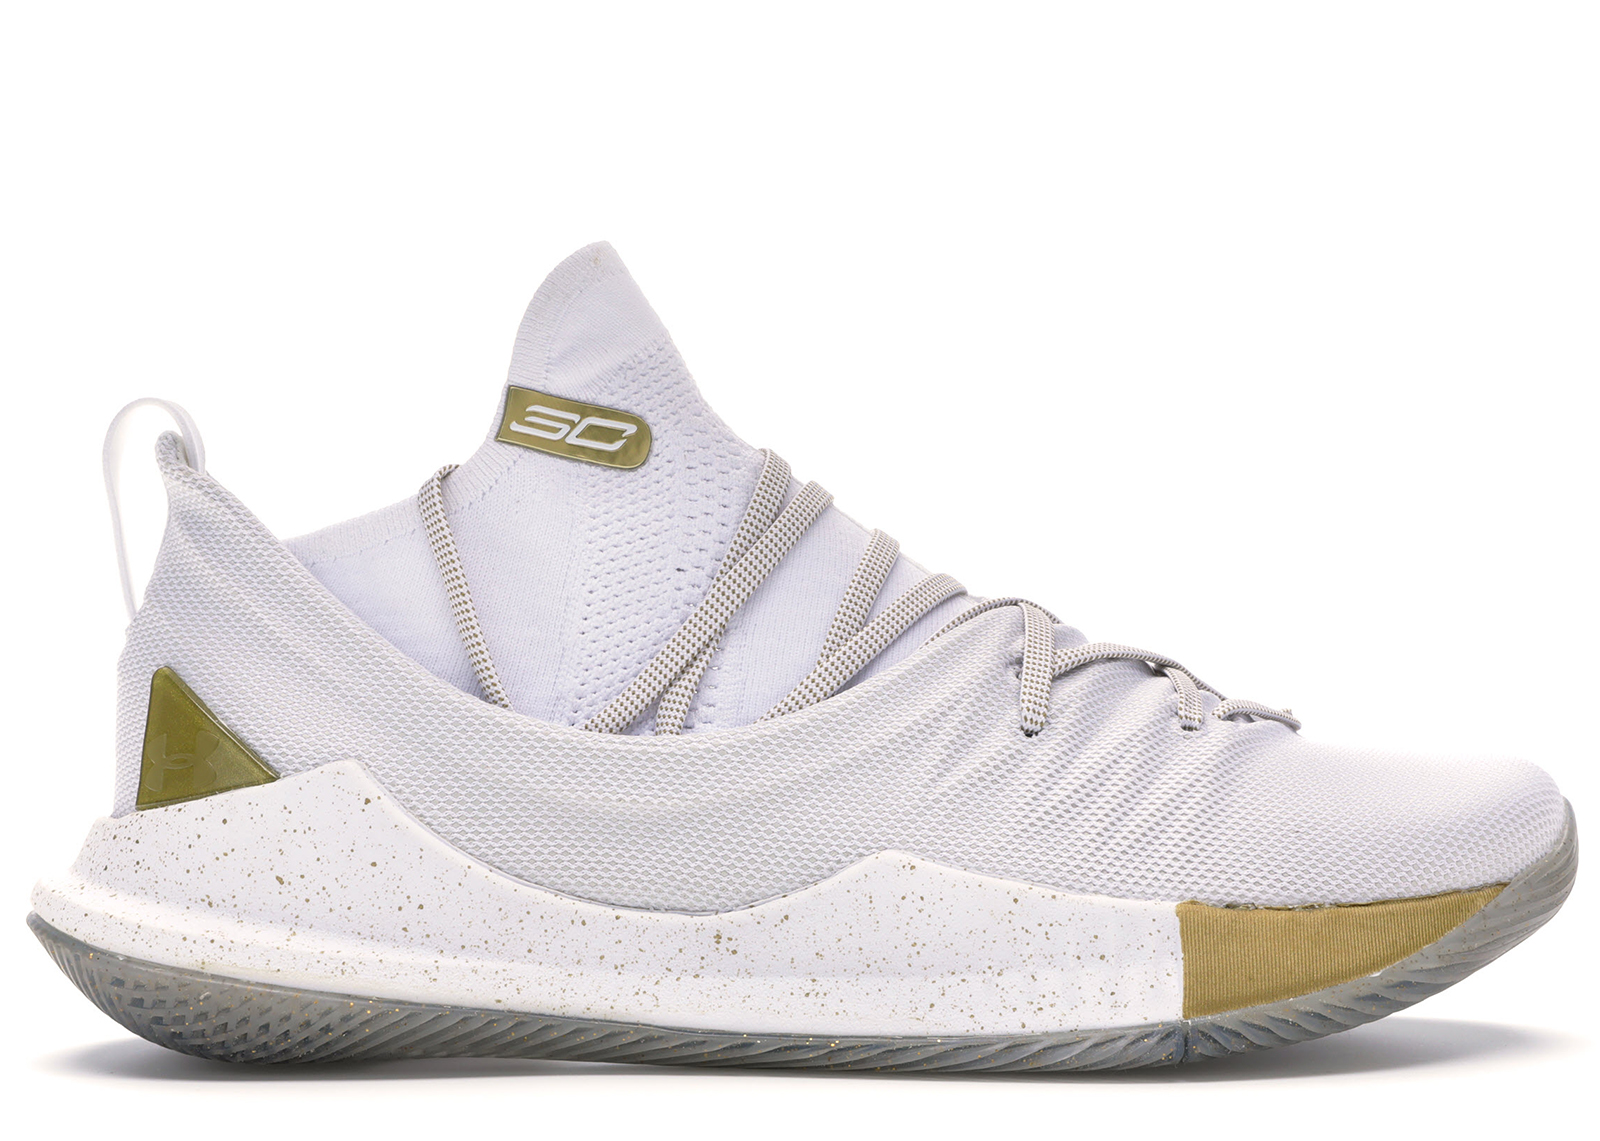 Under Armour Curry 5 White Gold - 3020657-100